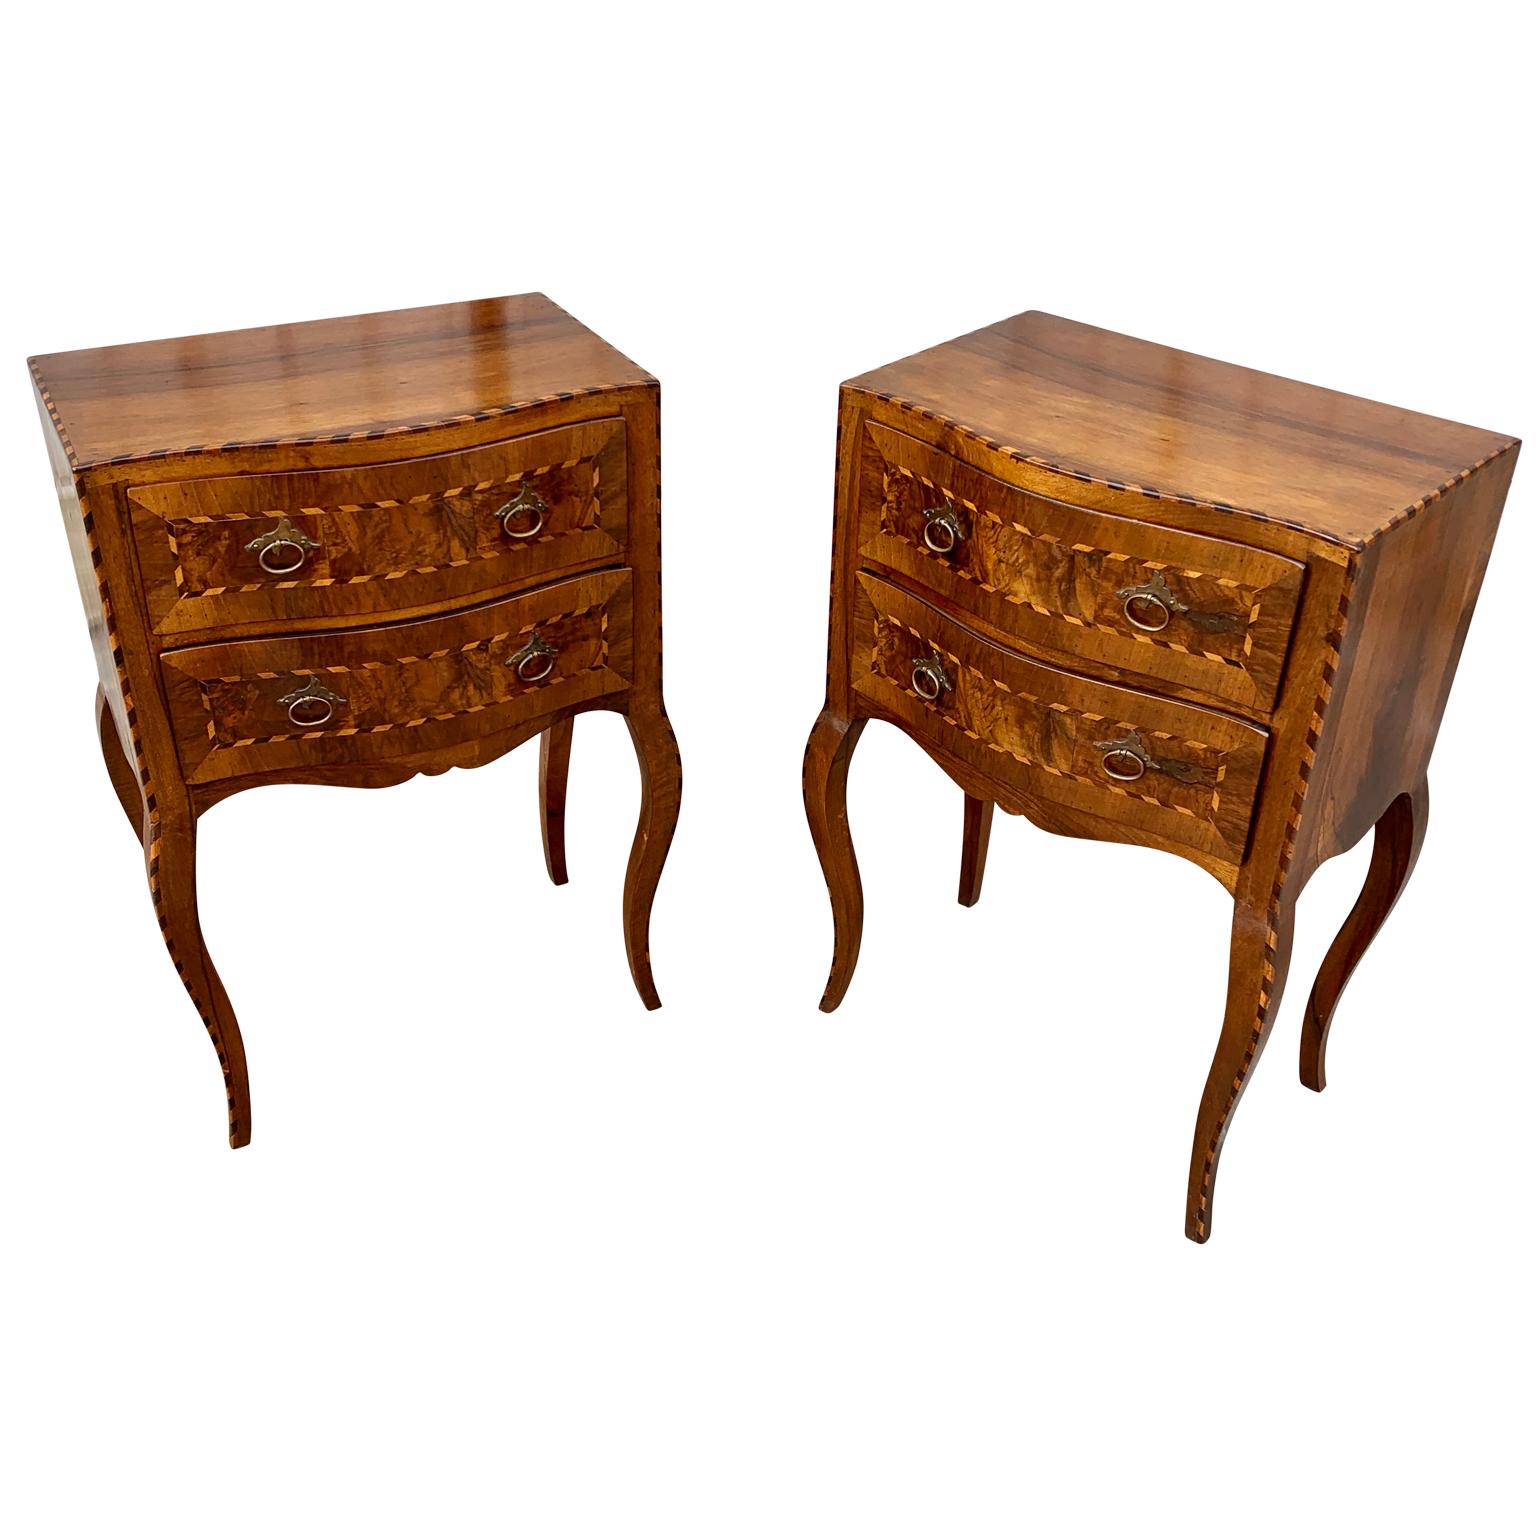 A pair of Italian nightstands or small chest of drawers in walnut, walnut root and citrus wood with marquetry work.
This pair of small Rococo style night tables are from the last part of the 19th Century and was bought from a wealthy estate in the